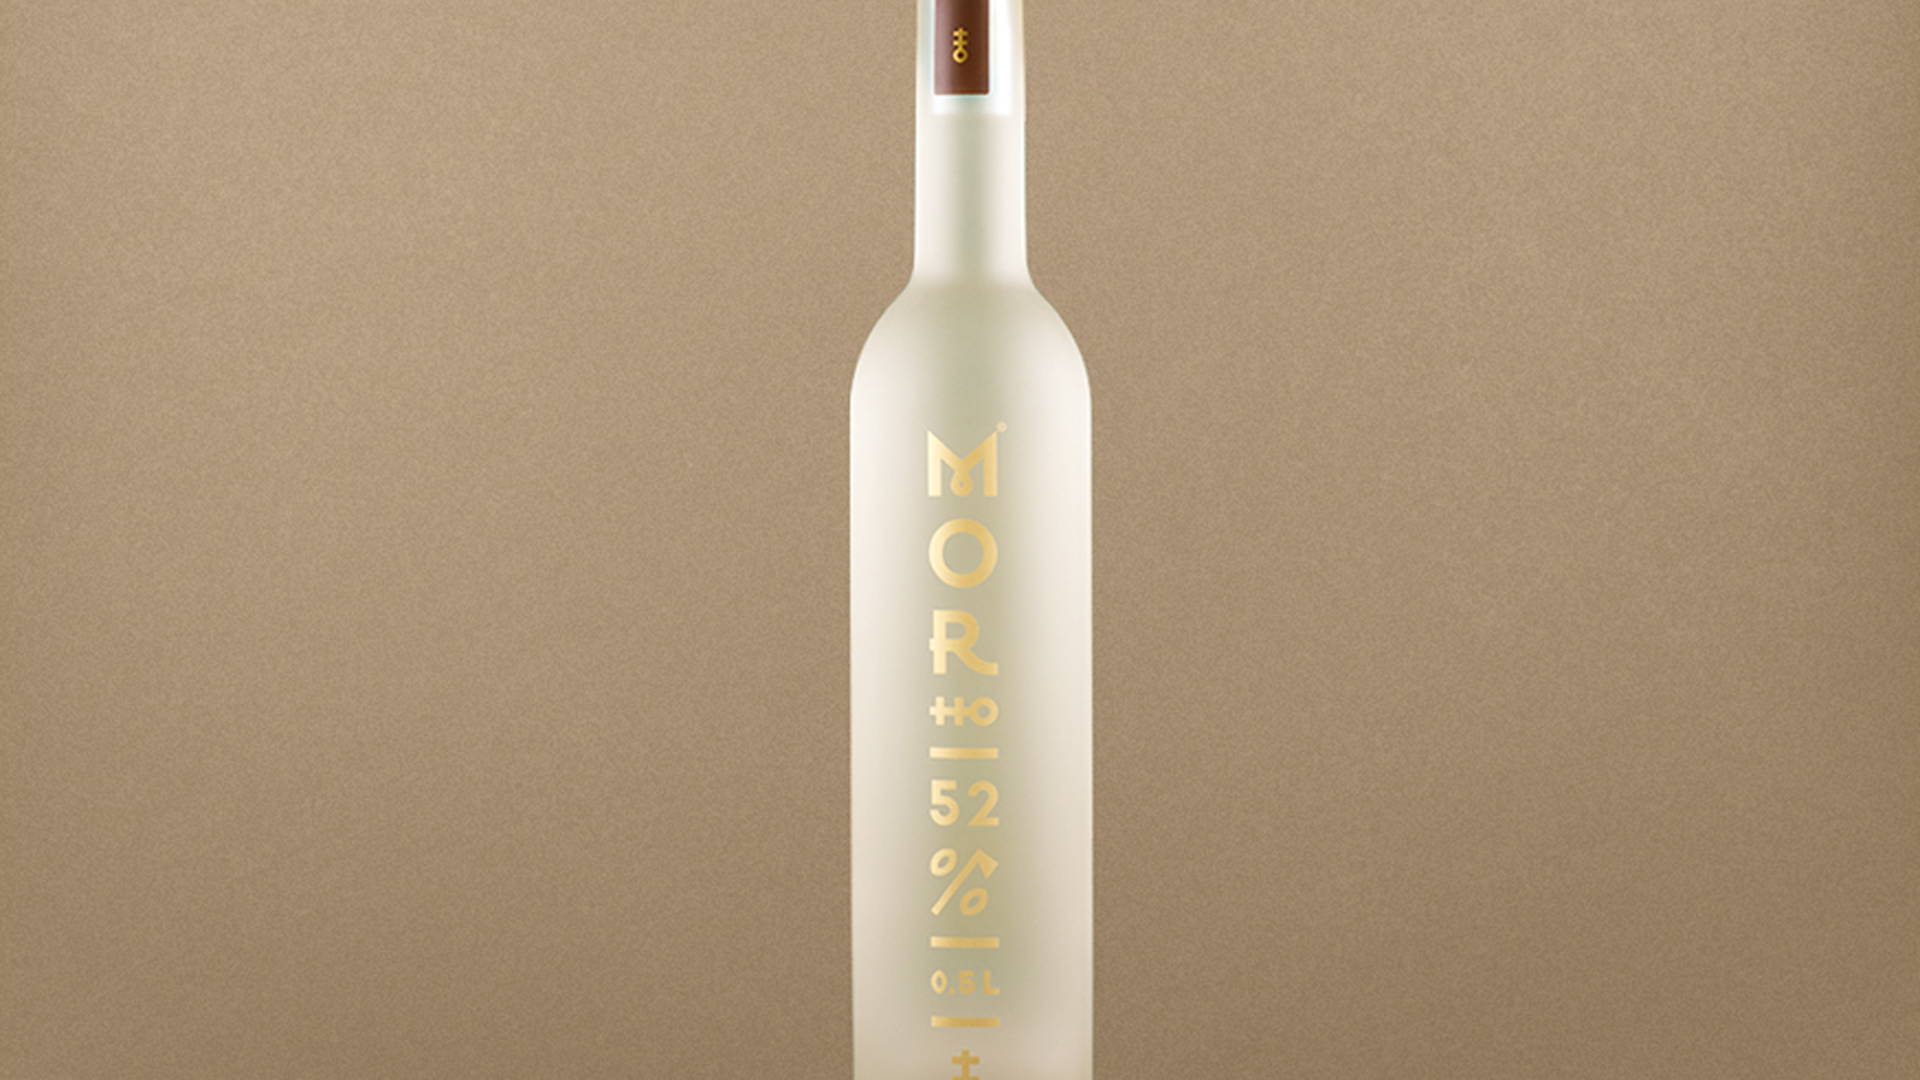 Featured image for Morho is a Traditional Slovakian Spirit With A Nice Minimalistic Look